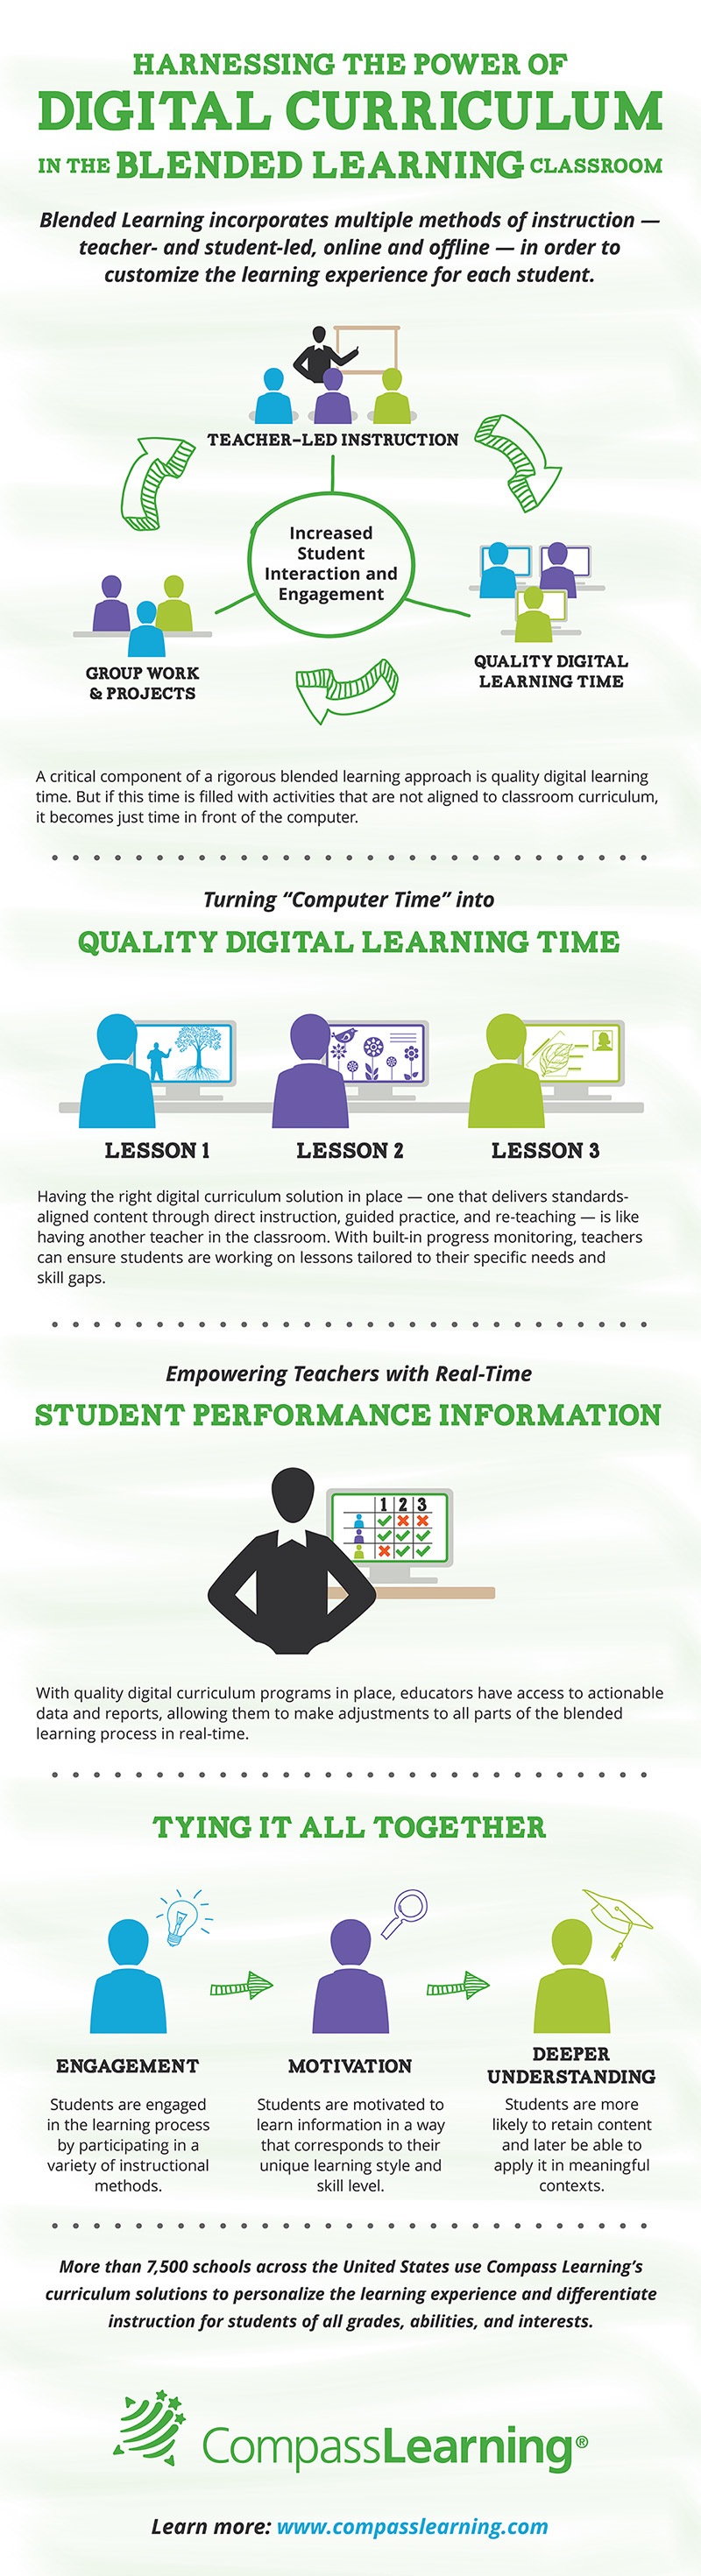 Harnessing The Power of Digital Curriculum In The Blended Learning Classroom Infographic